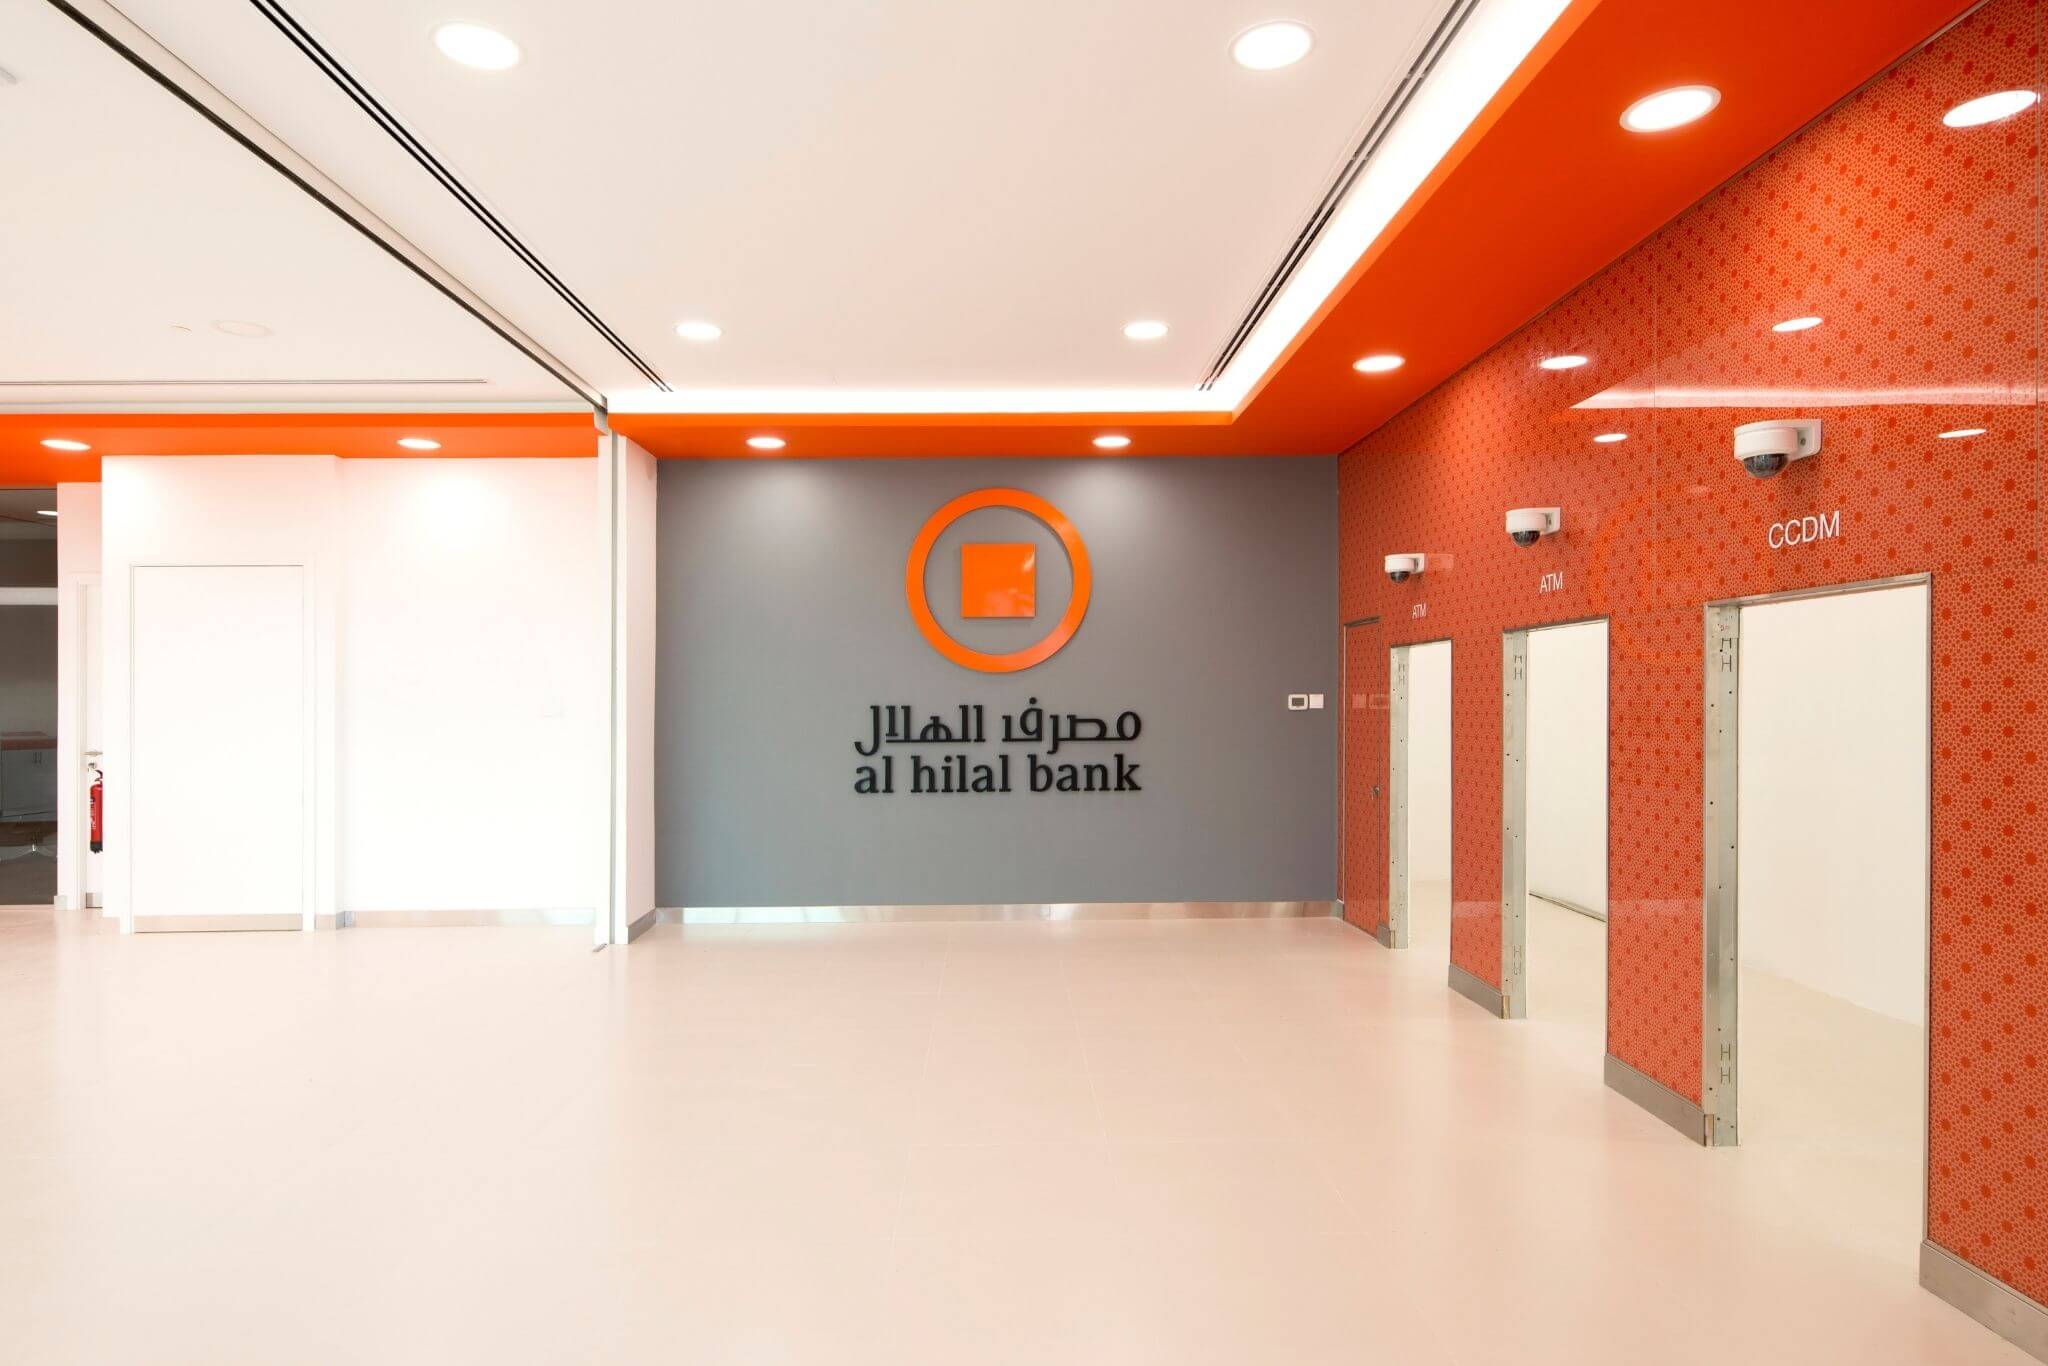 Al Hilal bank in Dubai design and fit out by Motif Interiors2